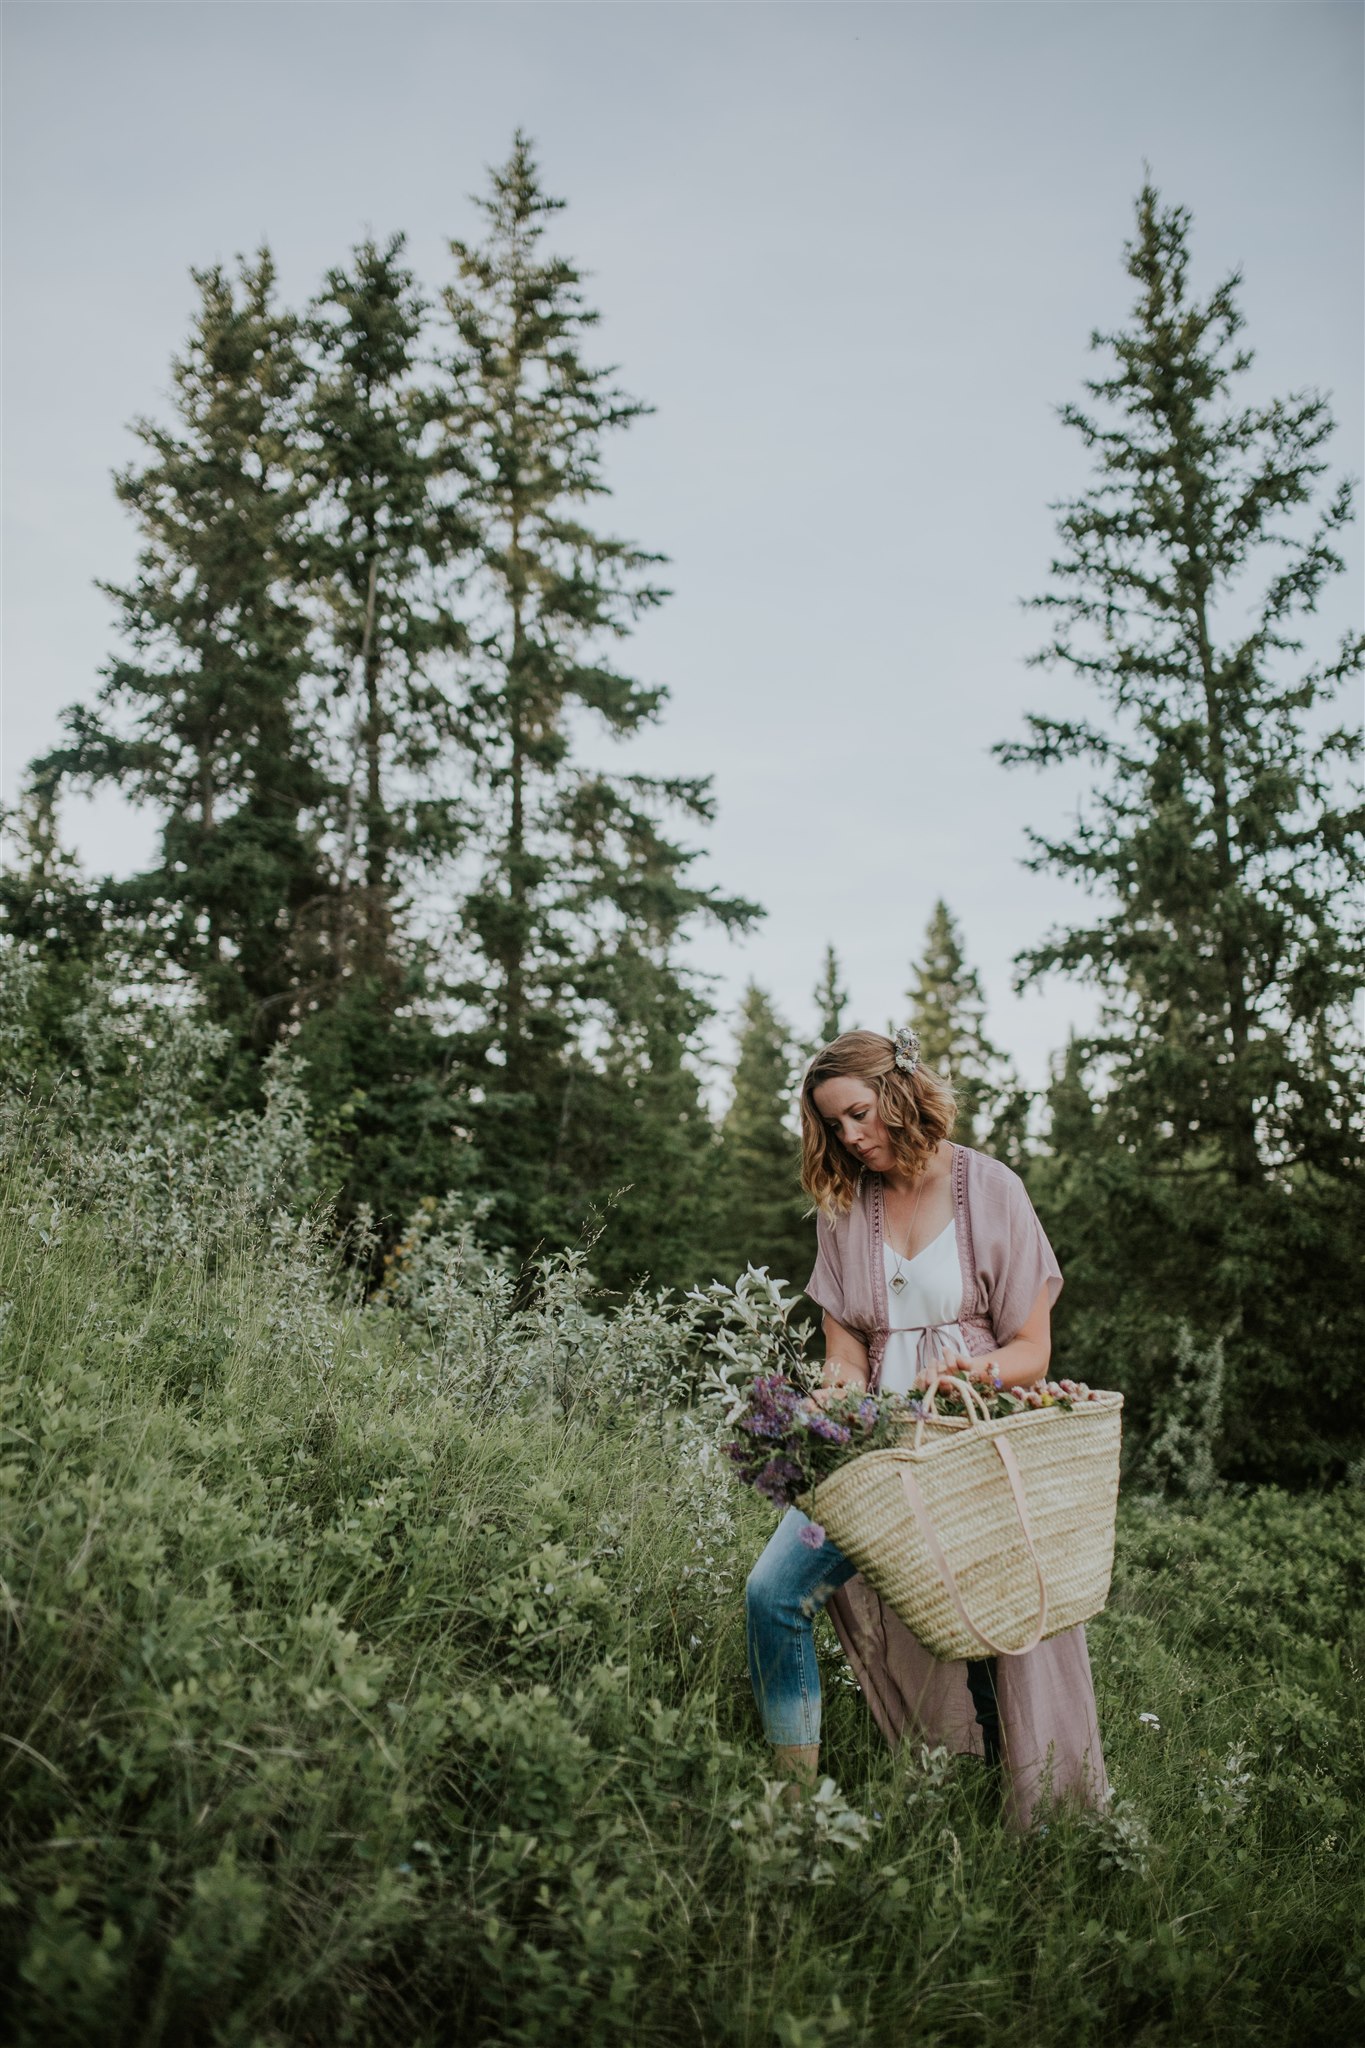 A portrait-oriented image featuring a person holding a basket in a natural setting